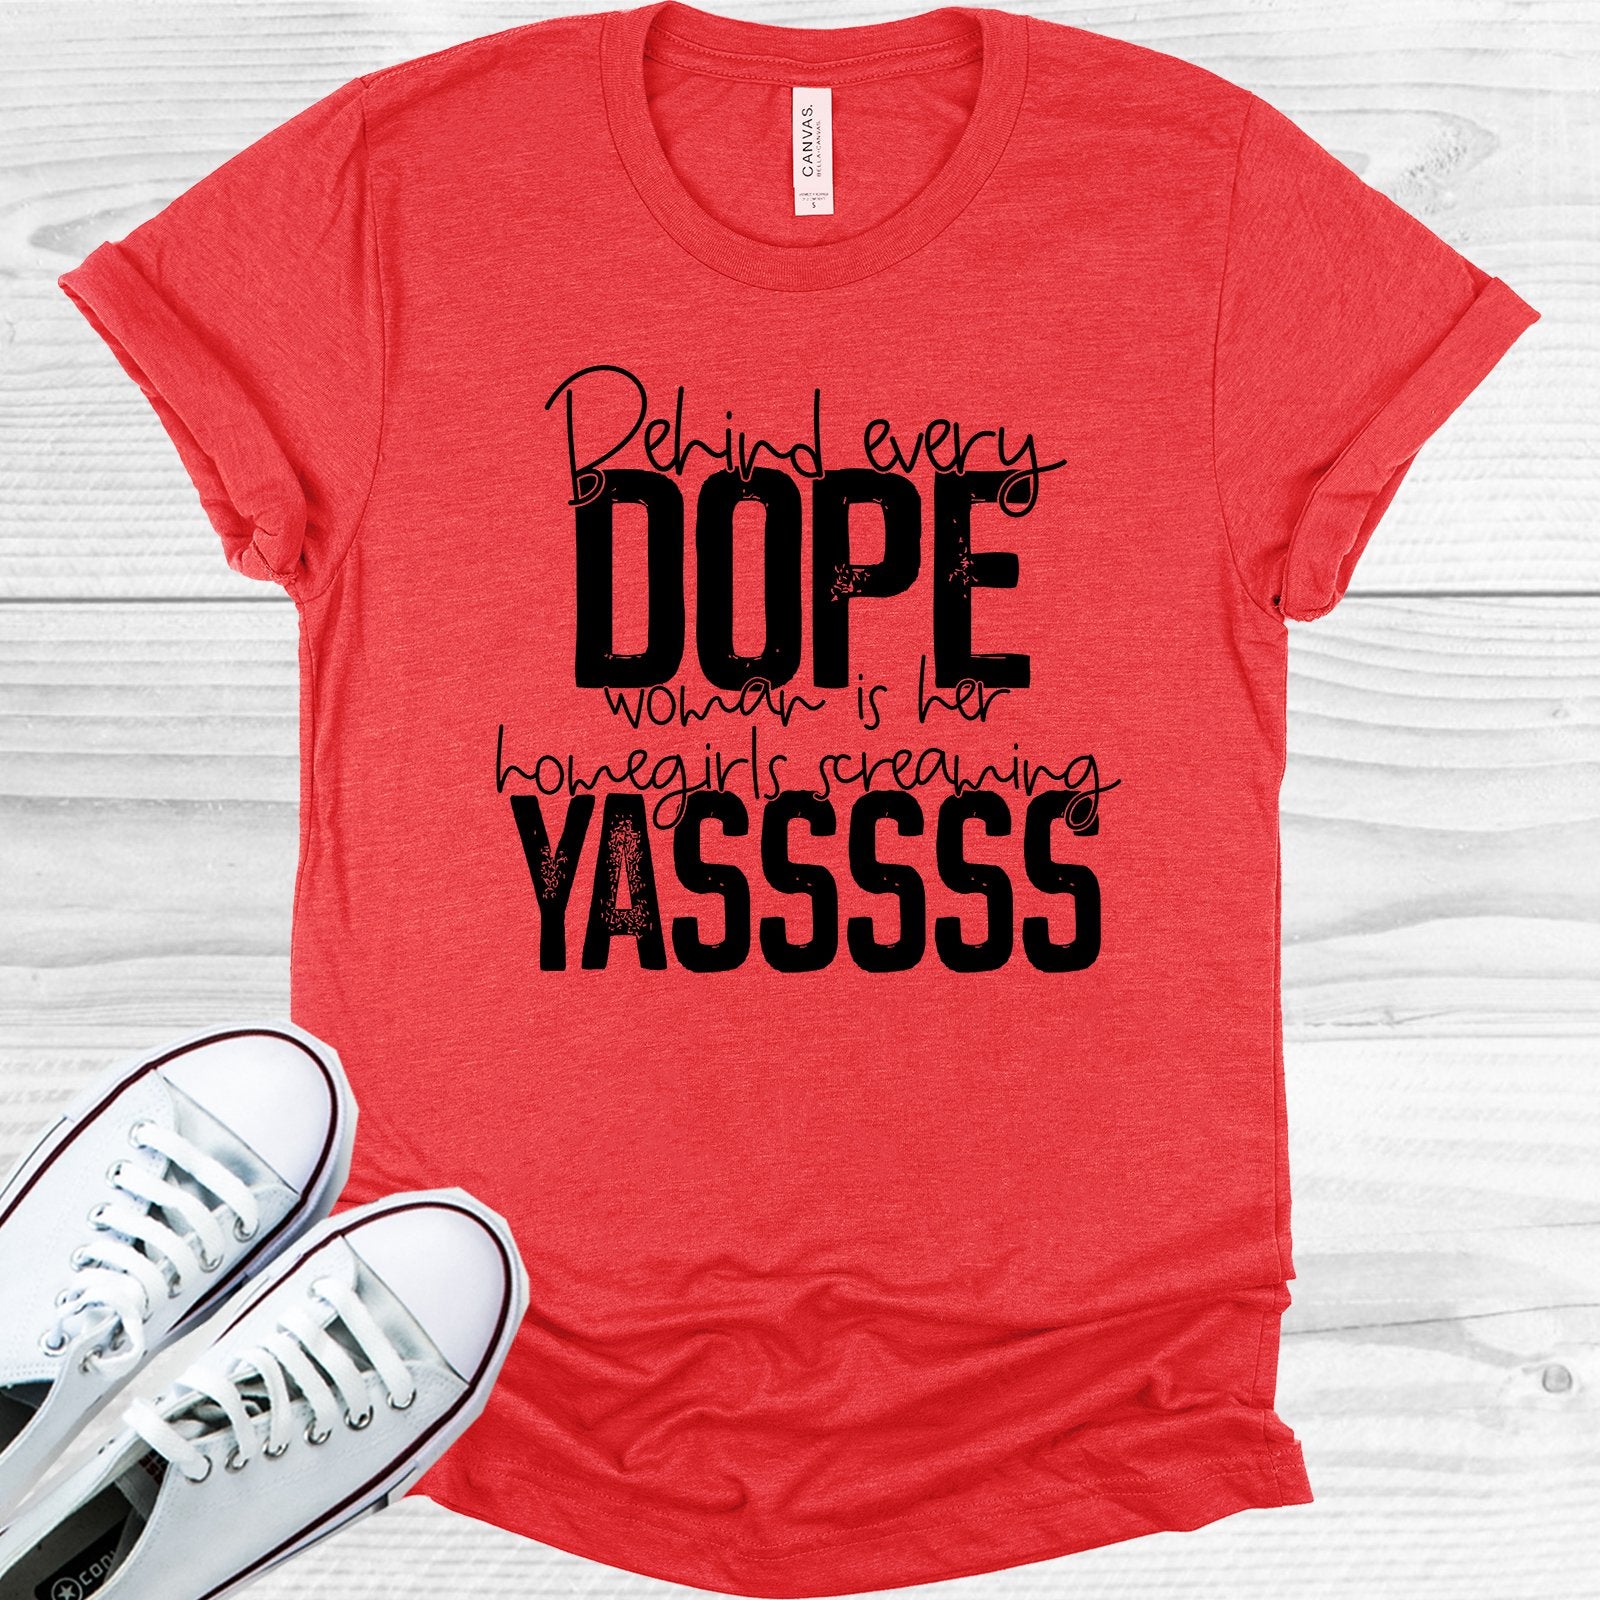 Behind Every Dope Woman In Her Homegirls Screaming Yasssss Graphic Tee Graphic Tee